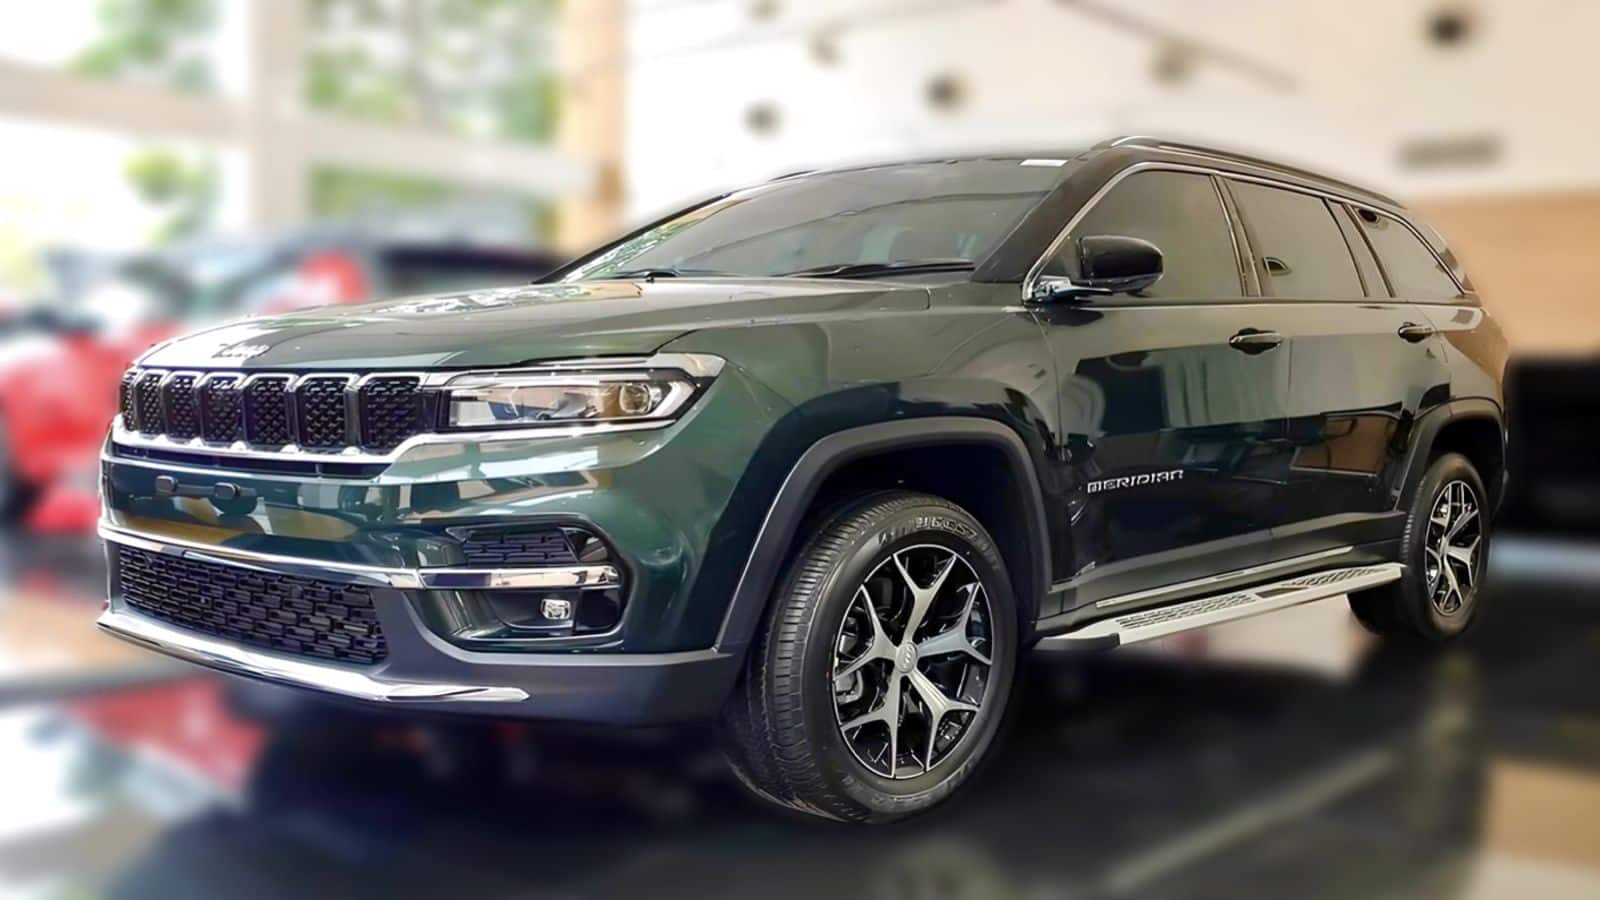 Jeep Meridian, Compass SUVs available with discounts worth ₹2.80 lakh